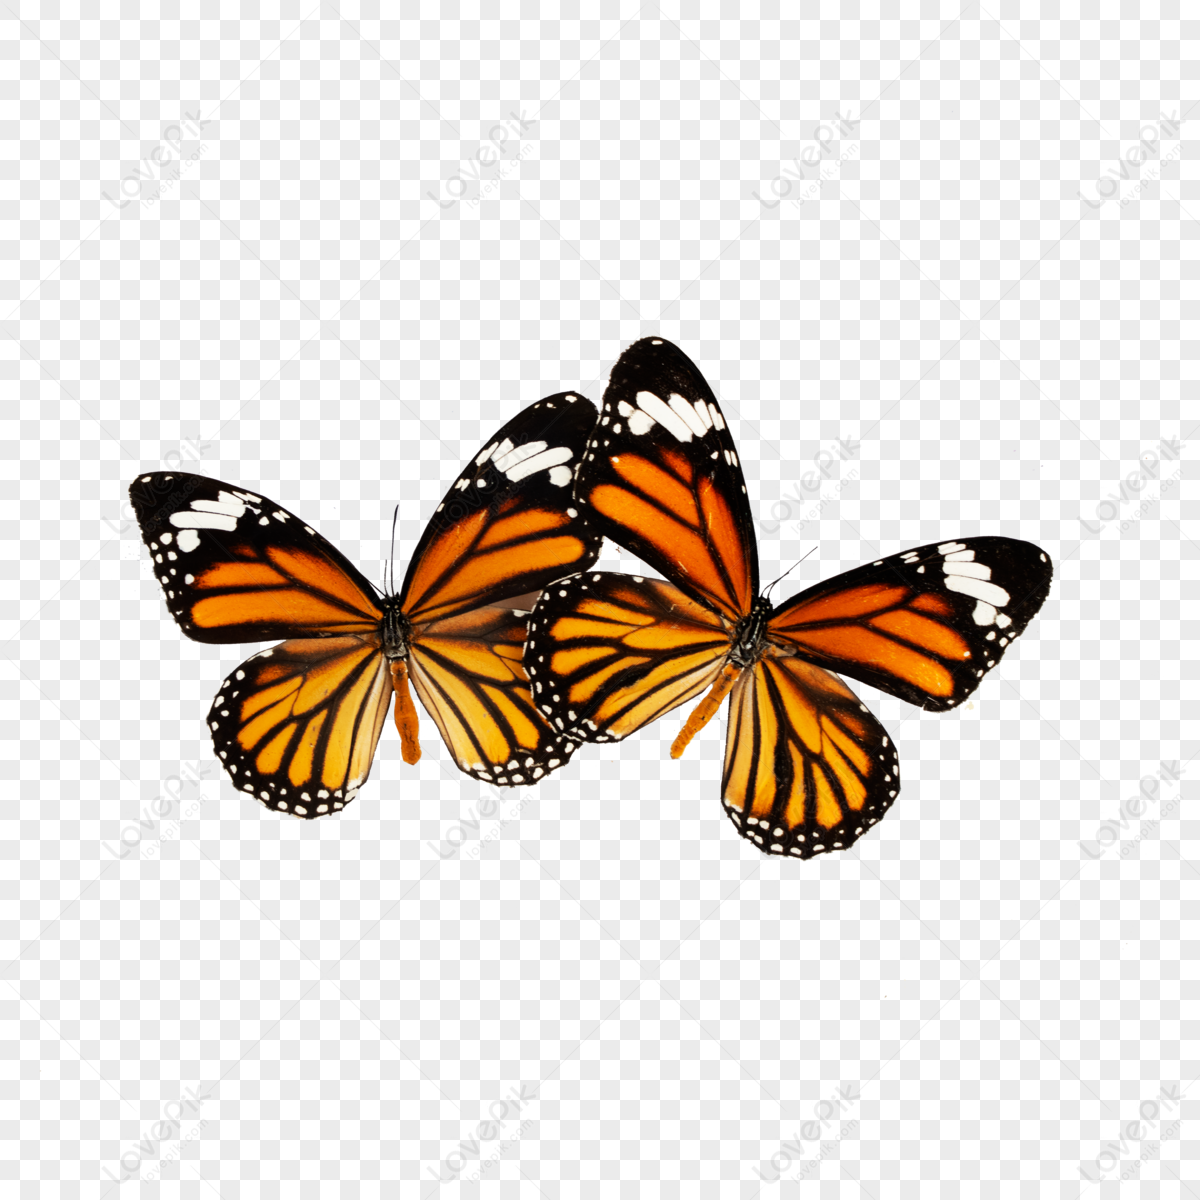 Two butterflies images hd pictures for free vectors download